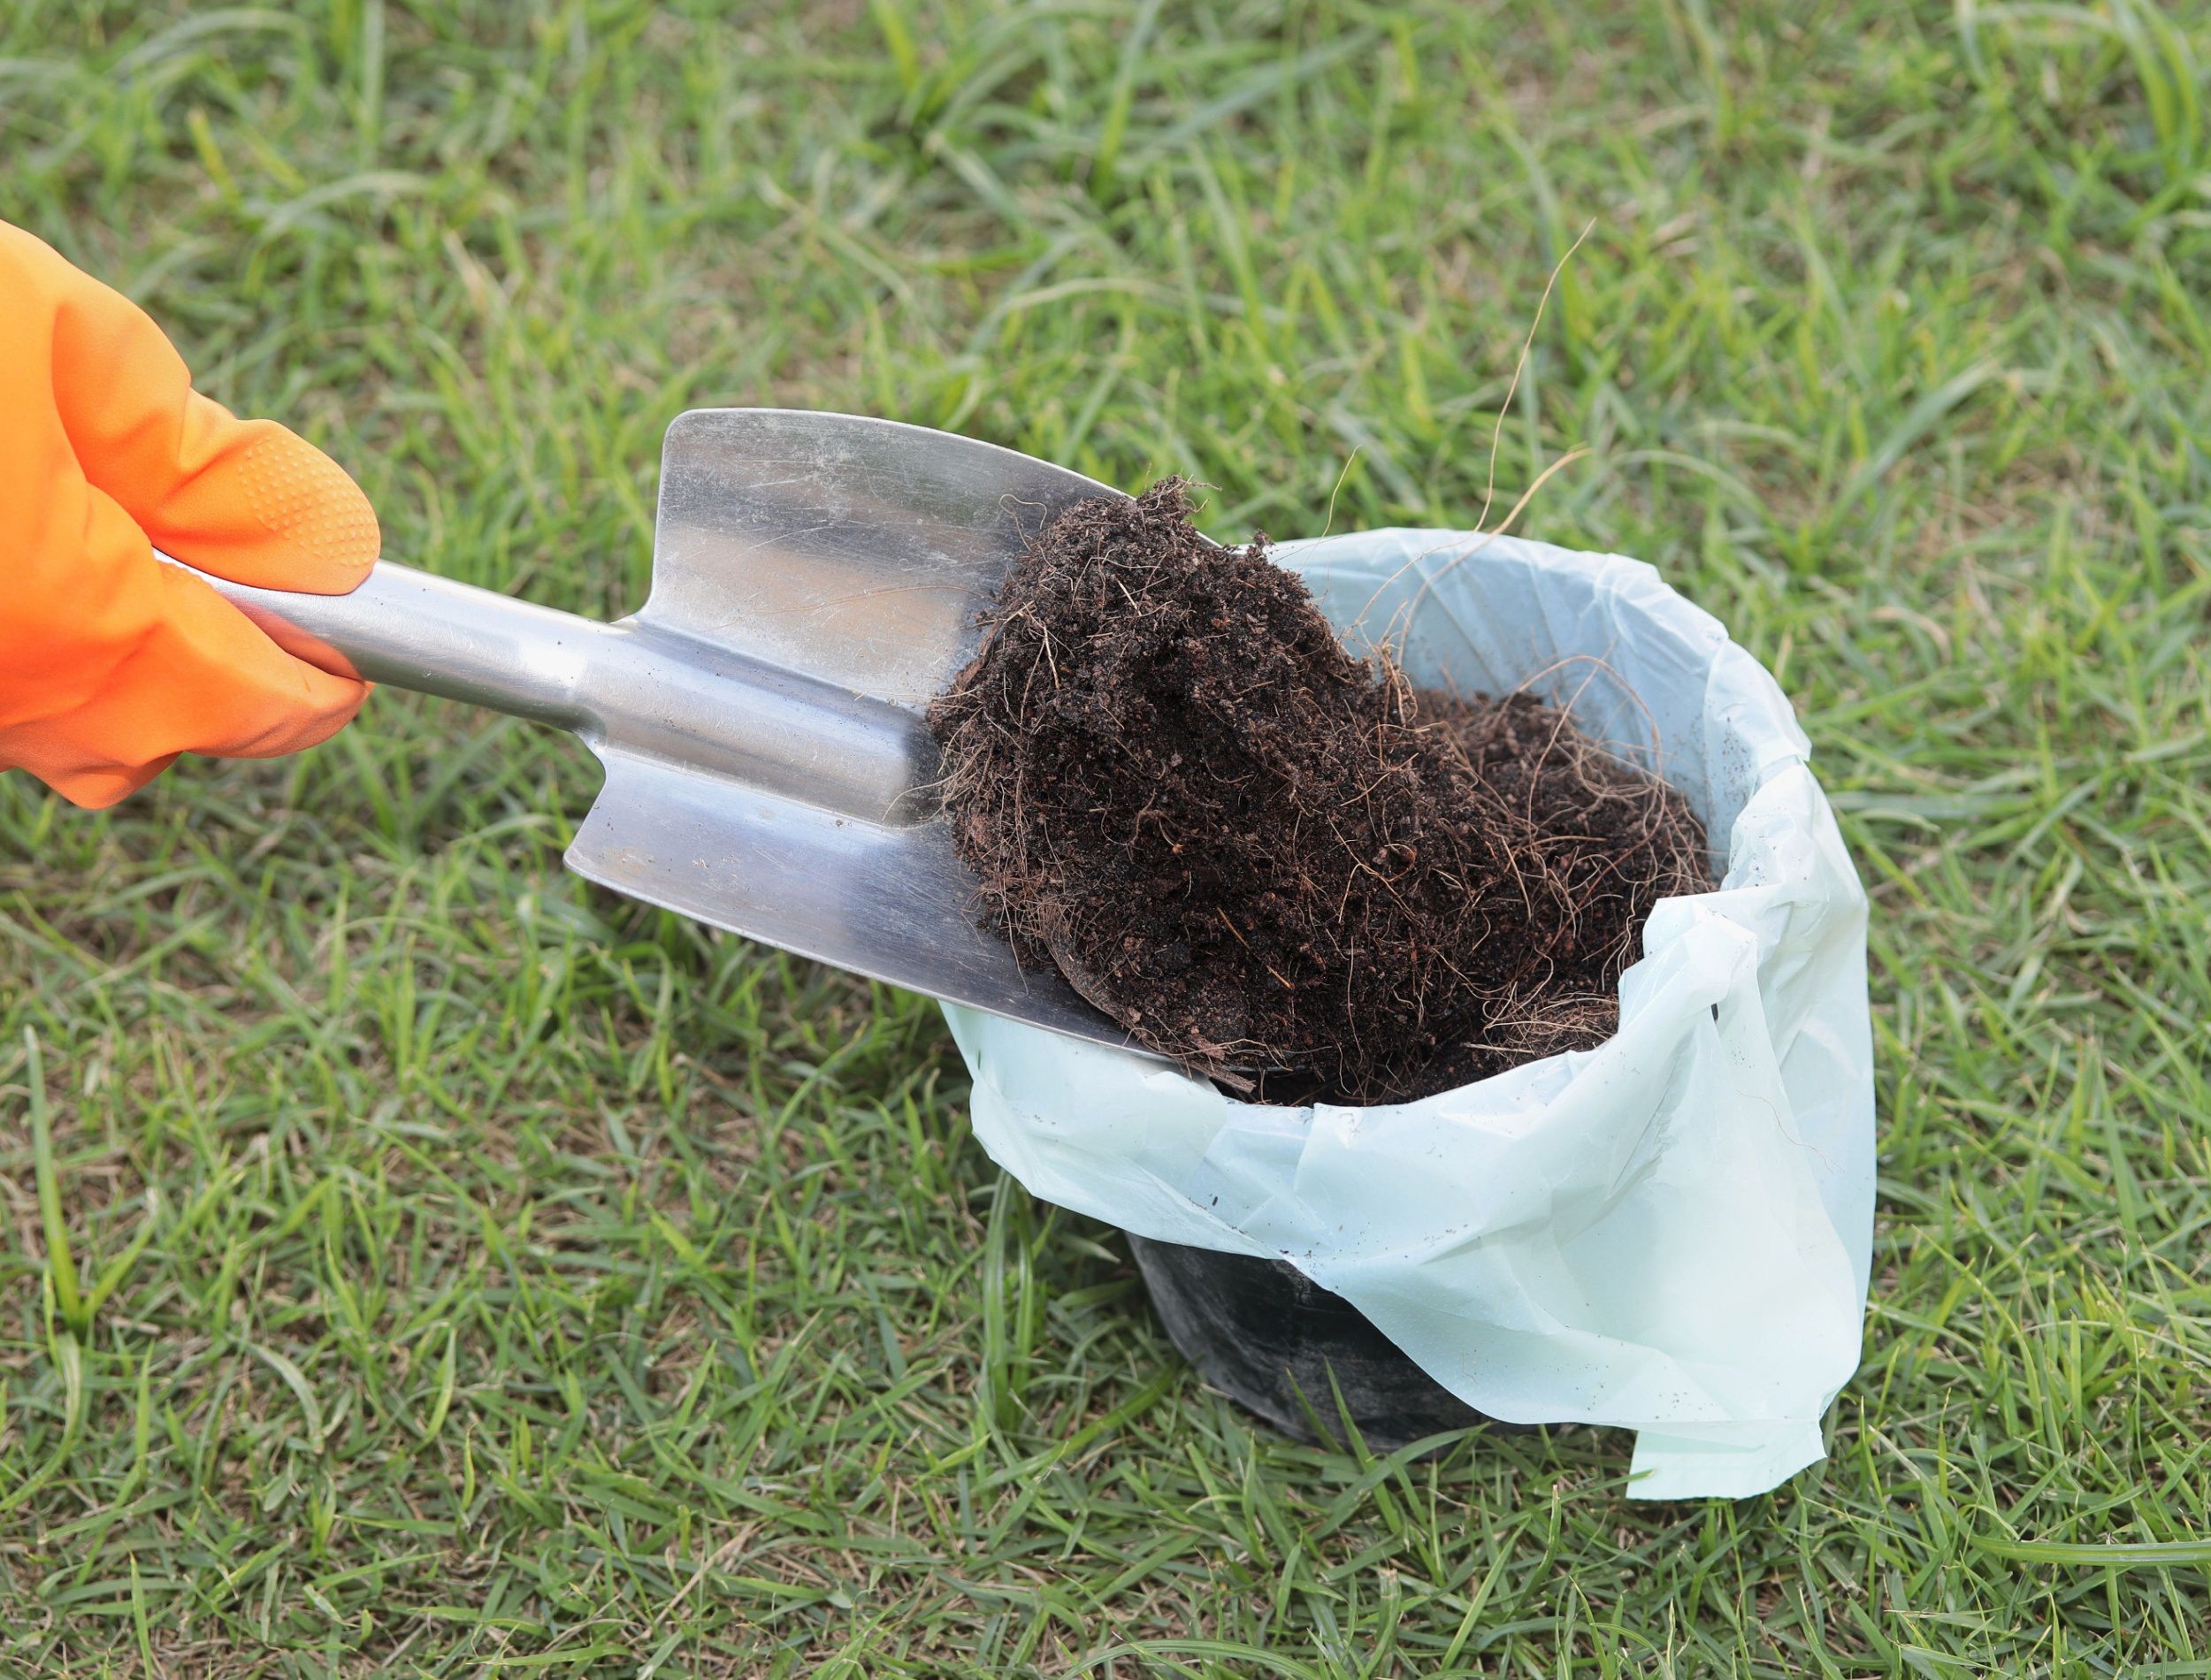 Wearing orange rubber gloves, use a shovel to scoop the soil into black plastic pots lined with white plastic bags on the grass